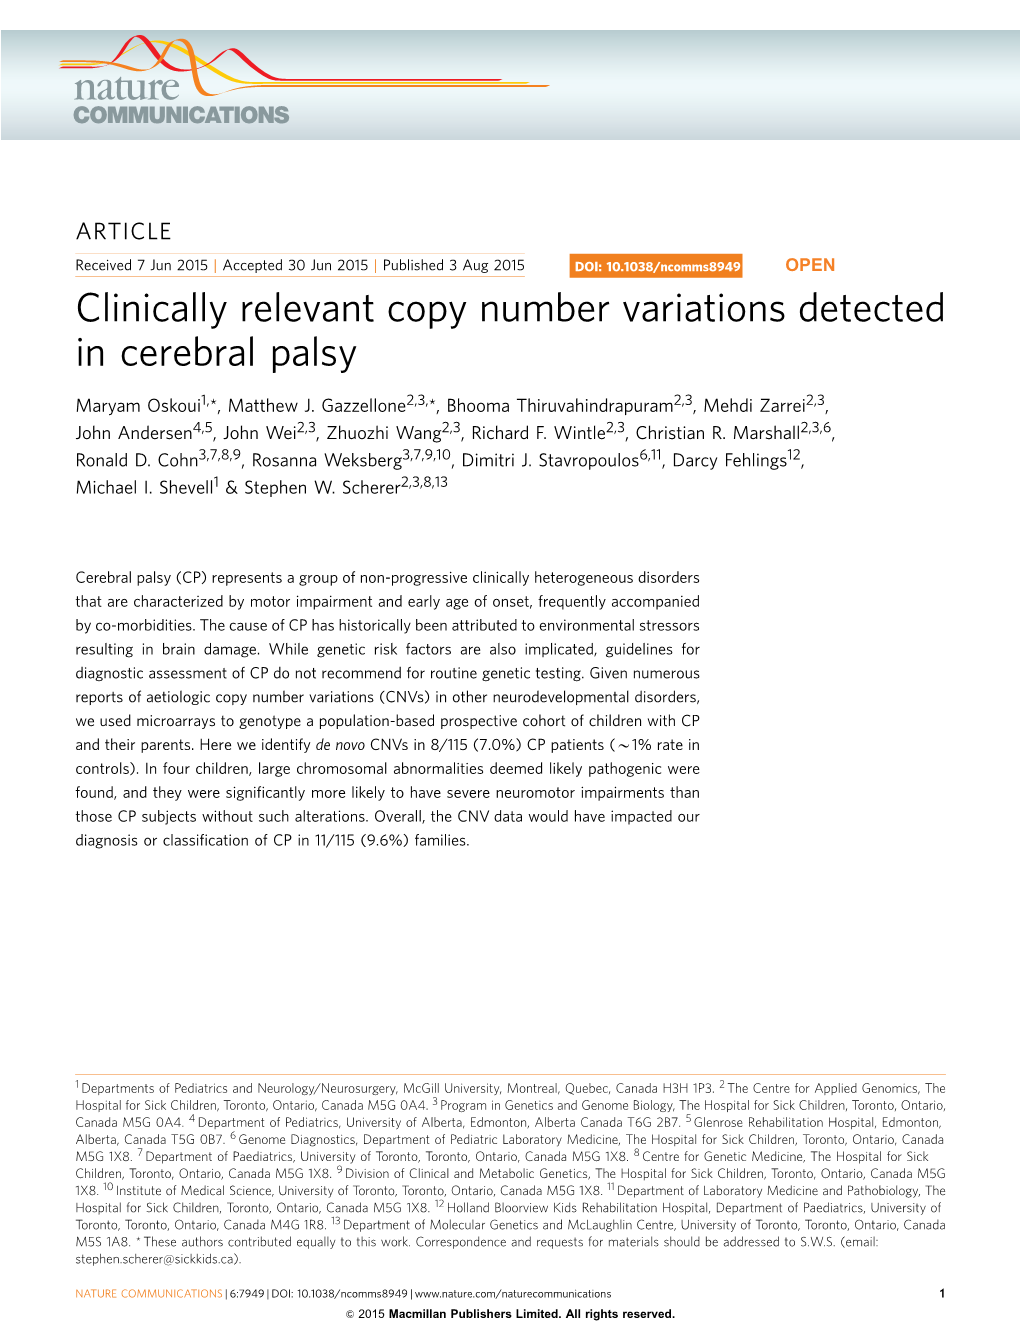 Clinically Relevant Copy Number Variations Detected in Cerebral Palsy